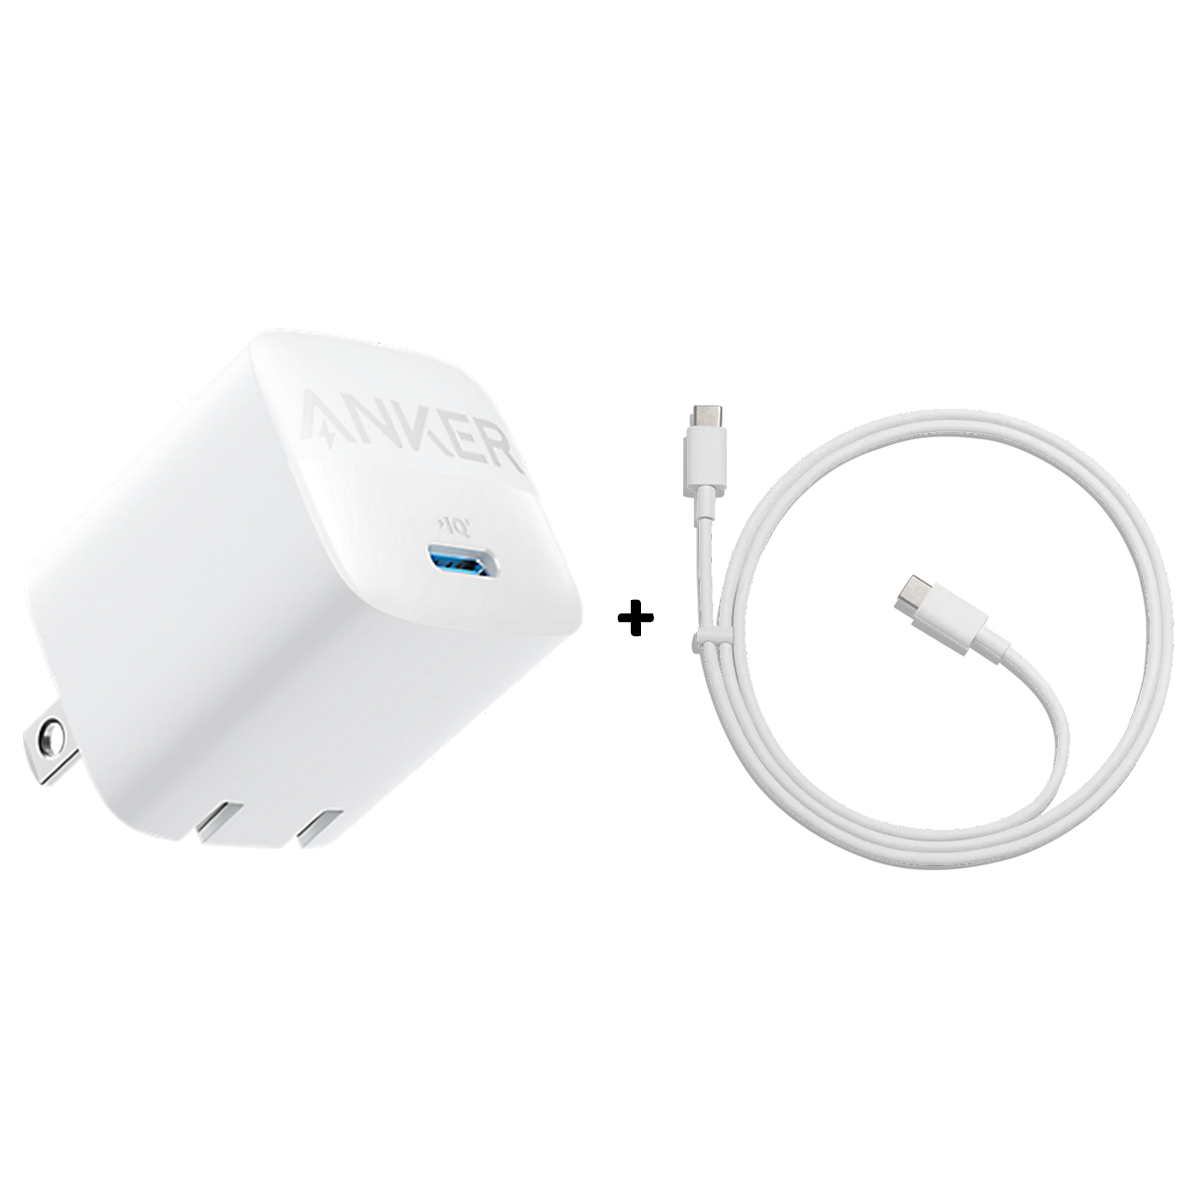 Anker 313 USB-C 30W Wall Charger for MacBook Air/iPhone/Galaxy/iPad Pro,  Pixel, and More